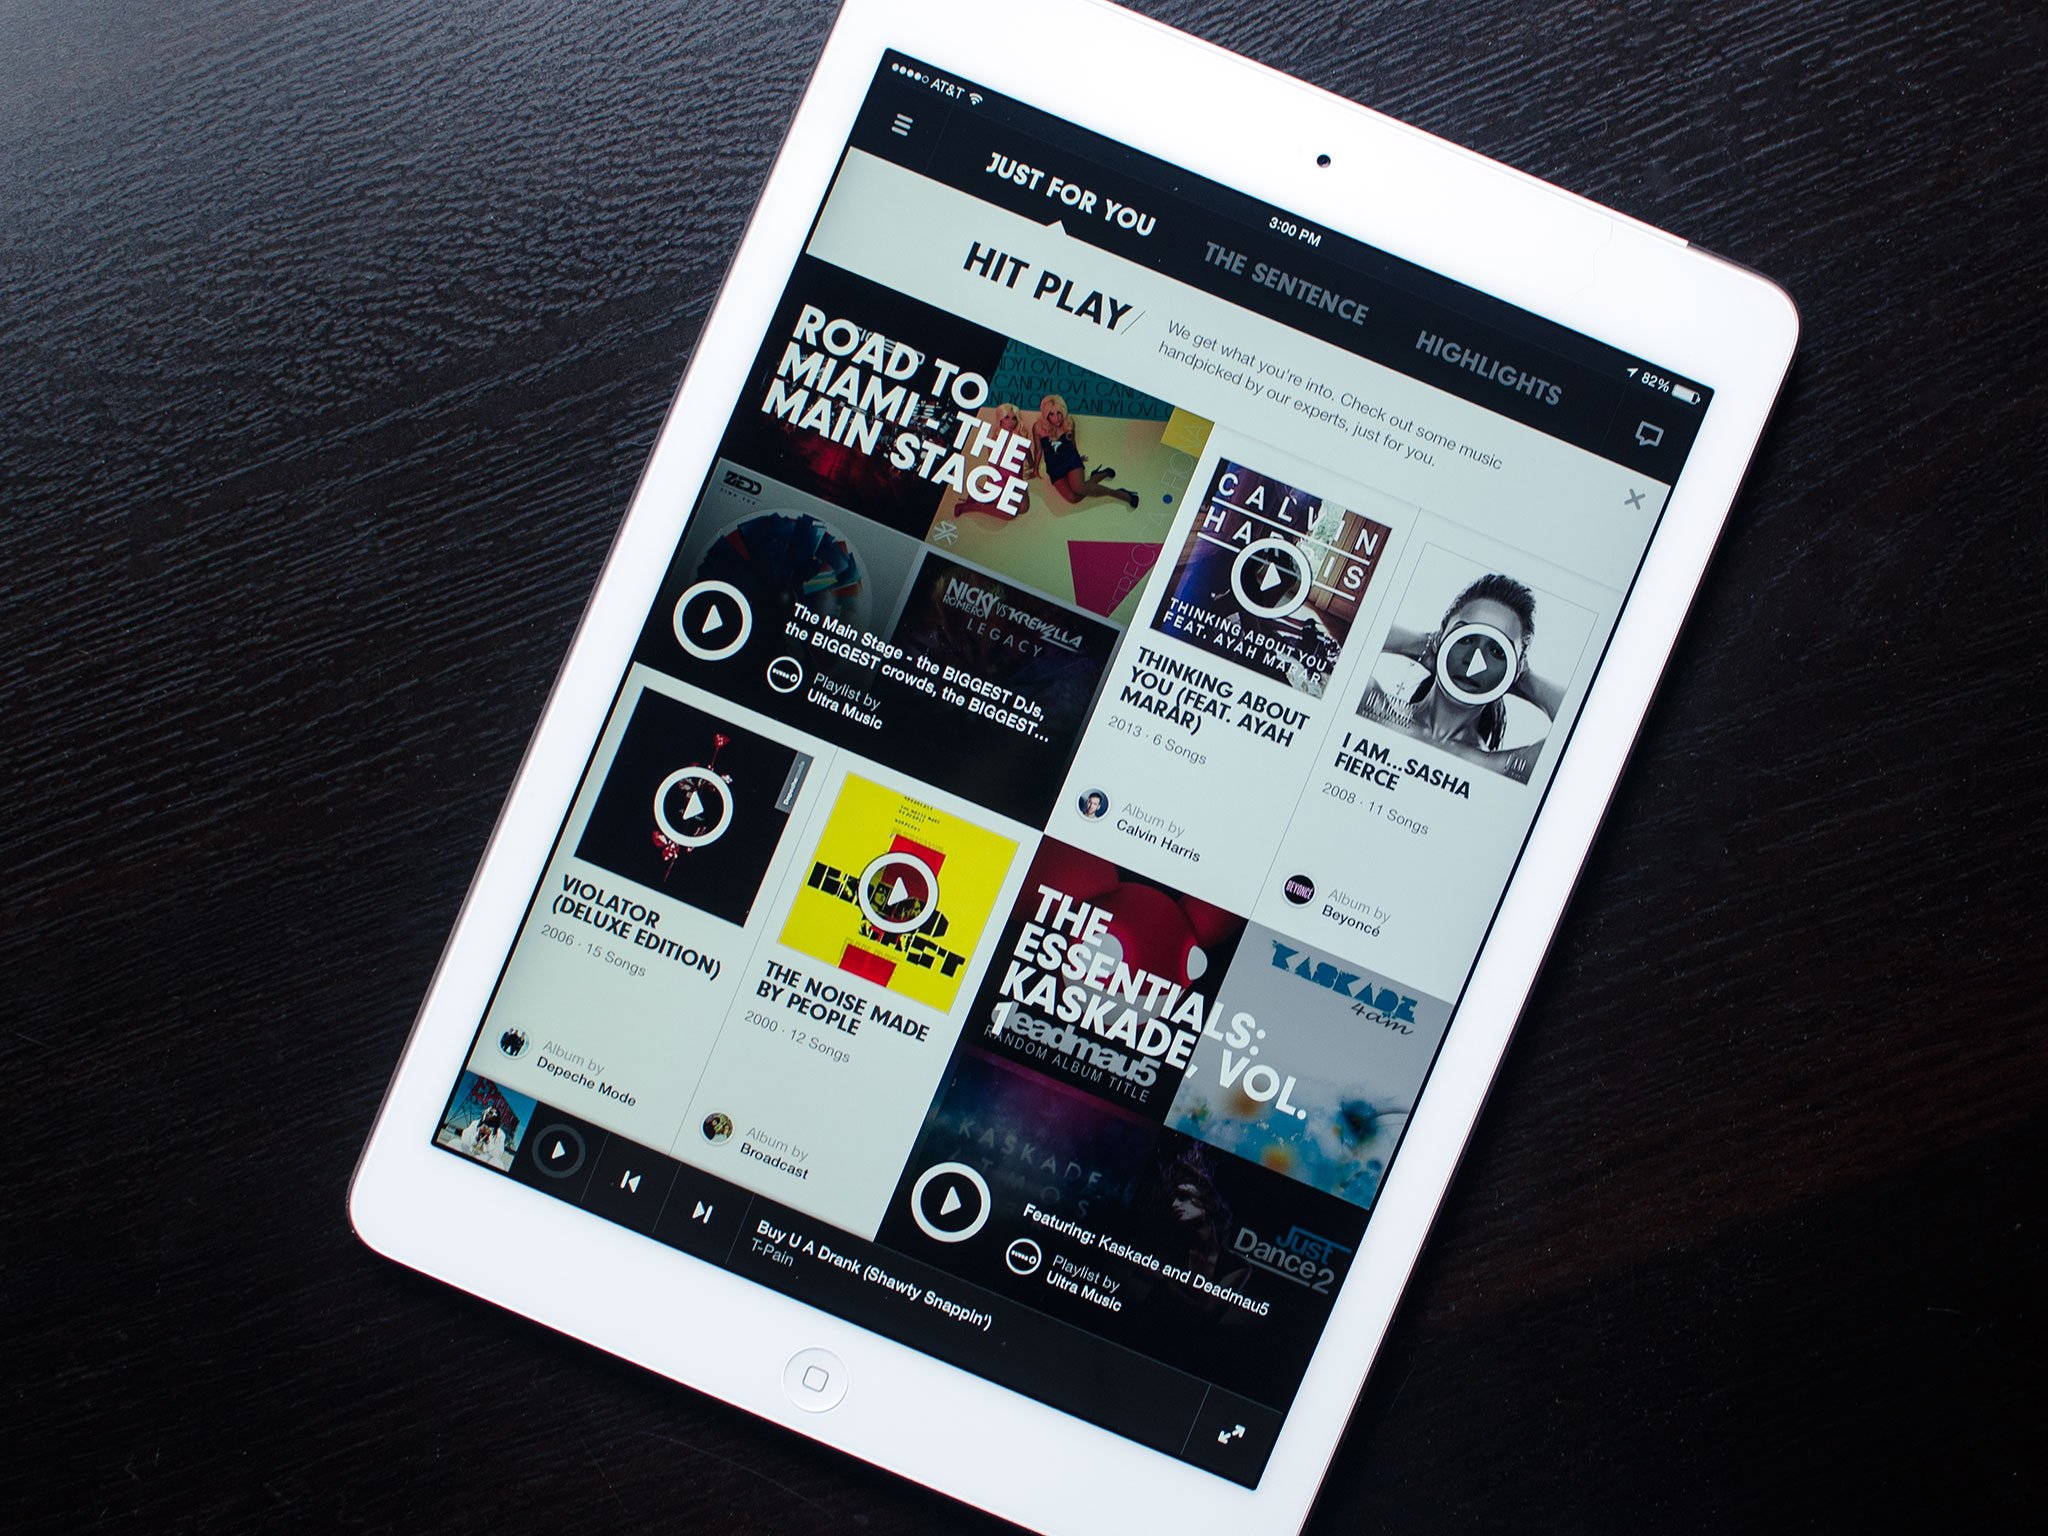 Beats Music for iPad review: Putting music discovery front and center